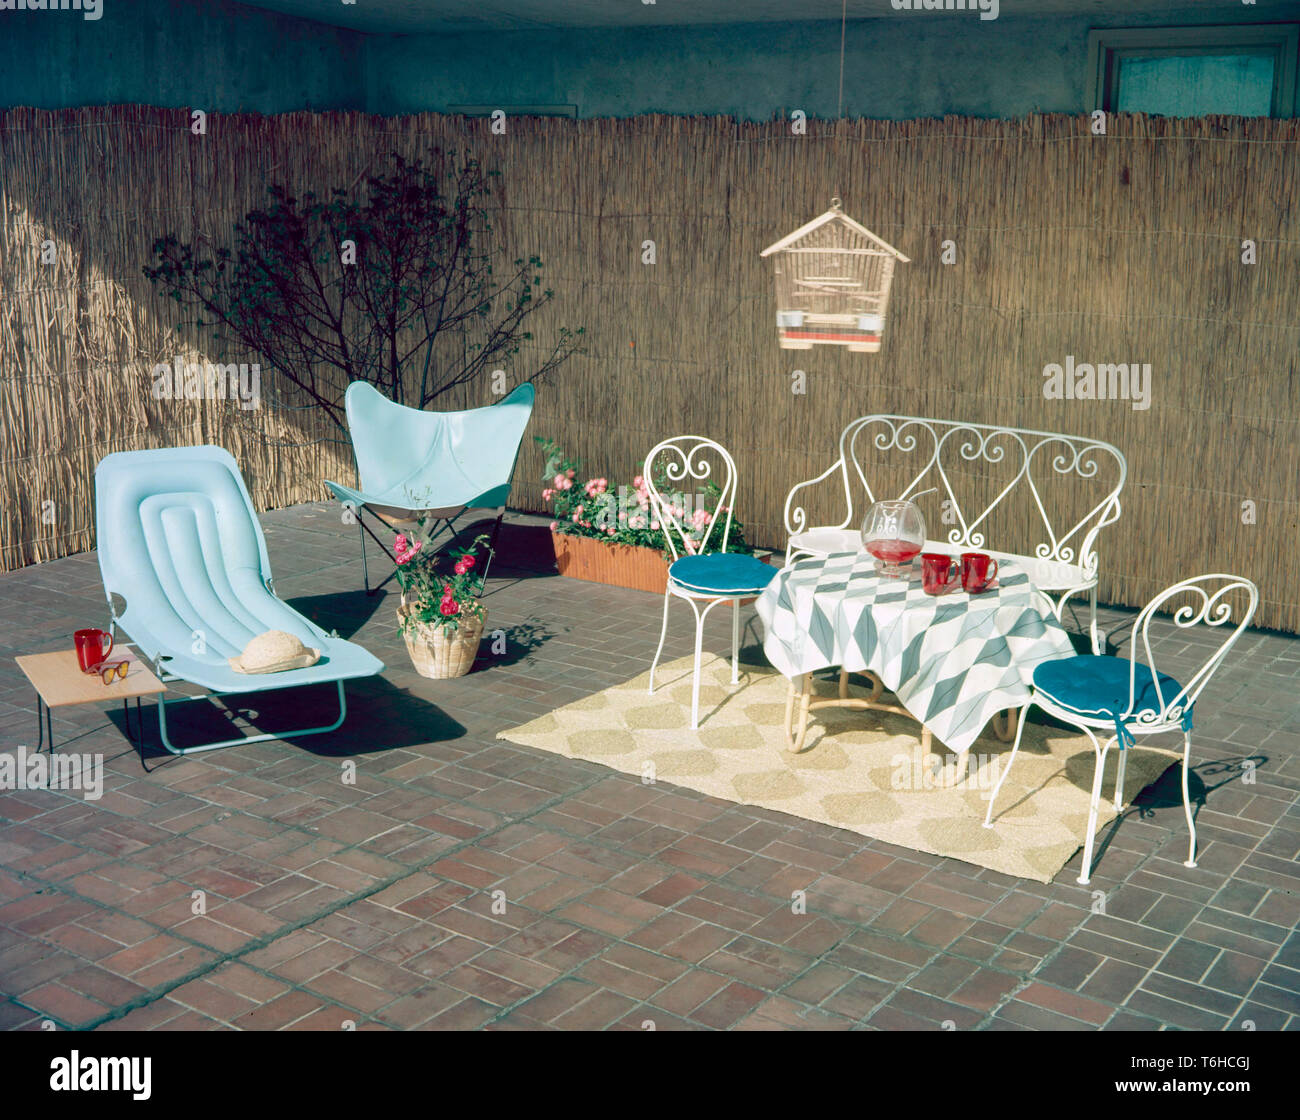 Home decor of the 1950s. A set of matching garden furniture with blue cushions. The chair is the typical Butterfly chair type, also known as a BKF or Hardoy chair. There is also a matching set of white painted iron furniture with two chairs and a sofa. The table is set with a bowl of lemonade and two glasses. Stock Photo